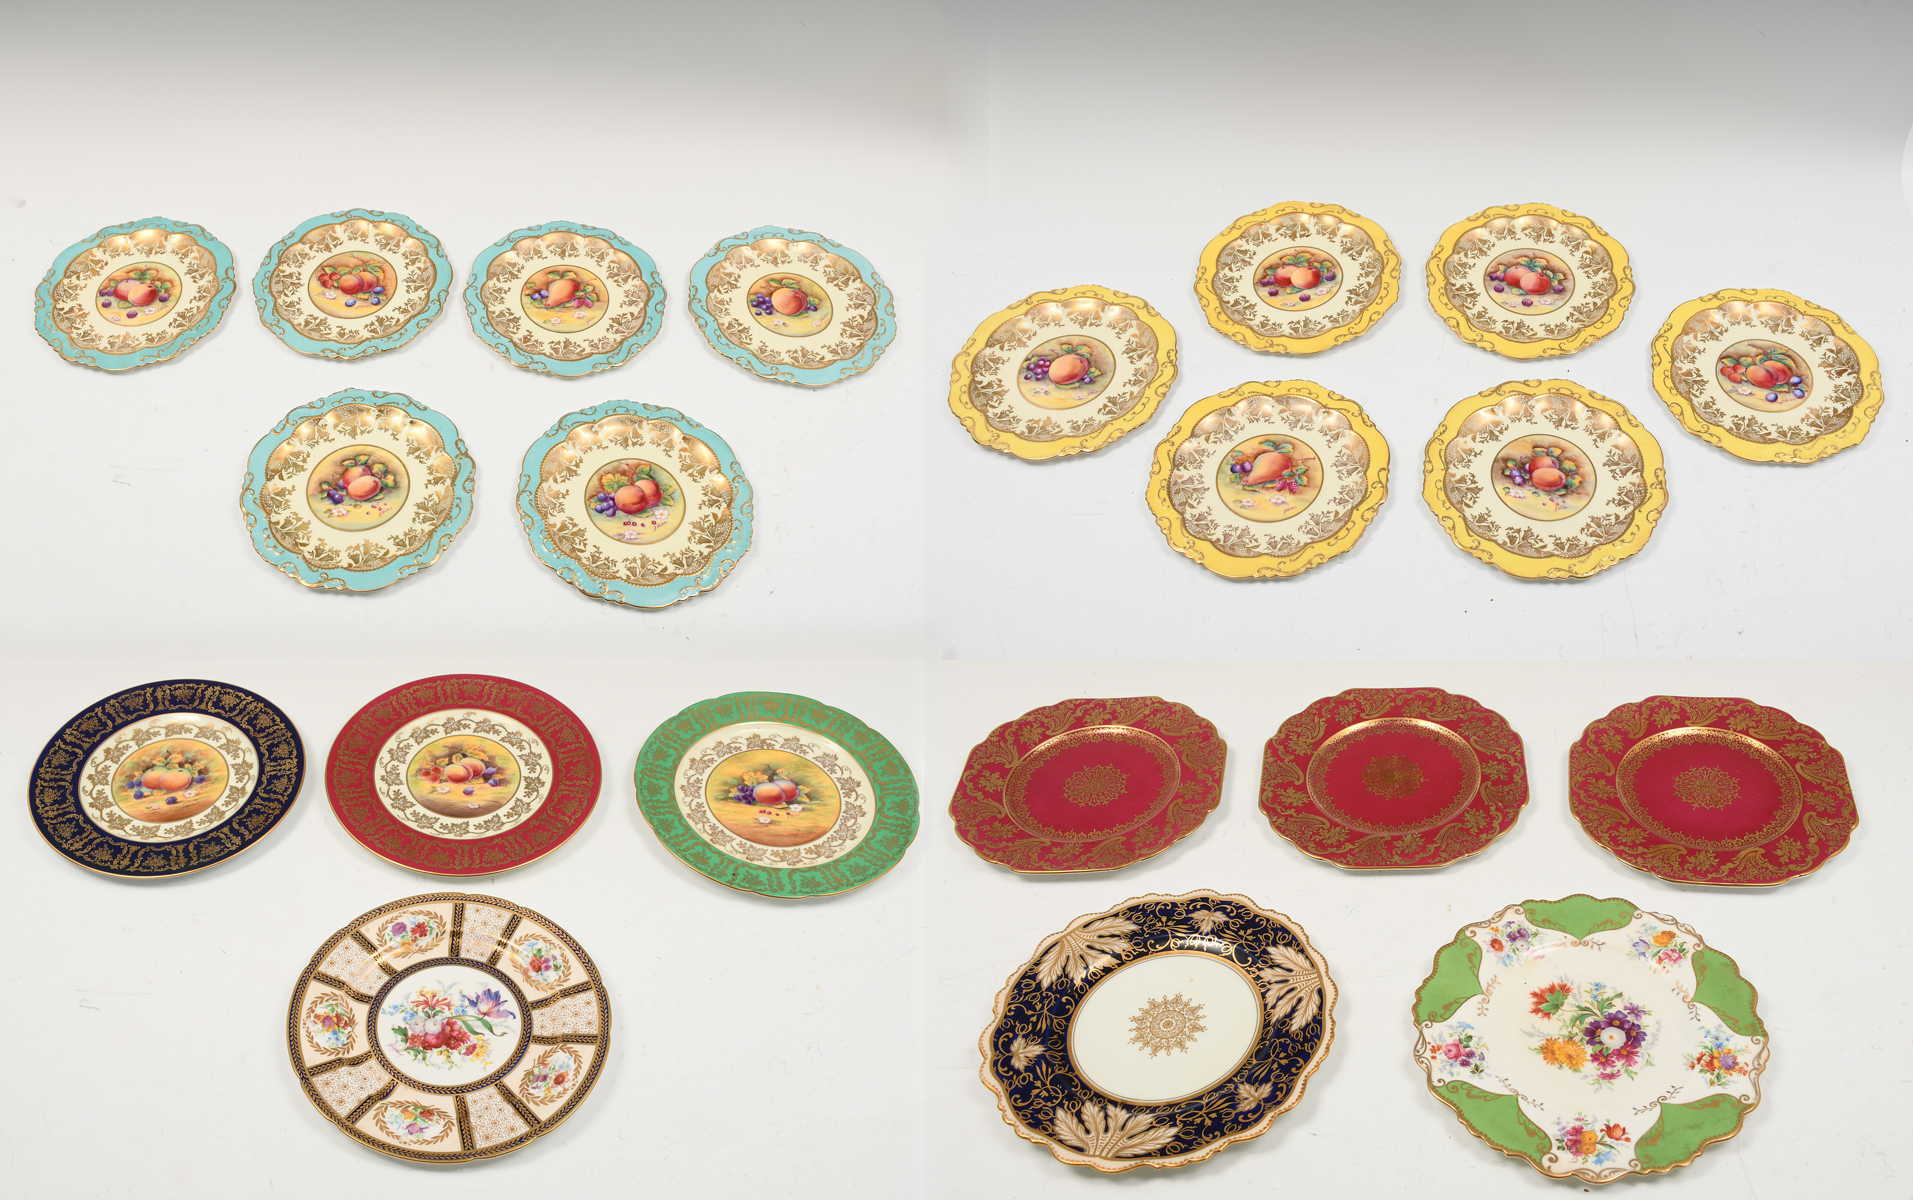 21 PC PARAGON PLATE COLLECTION  36a5cd